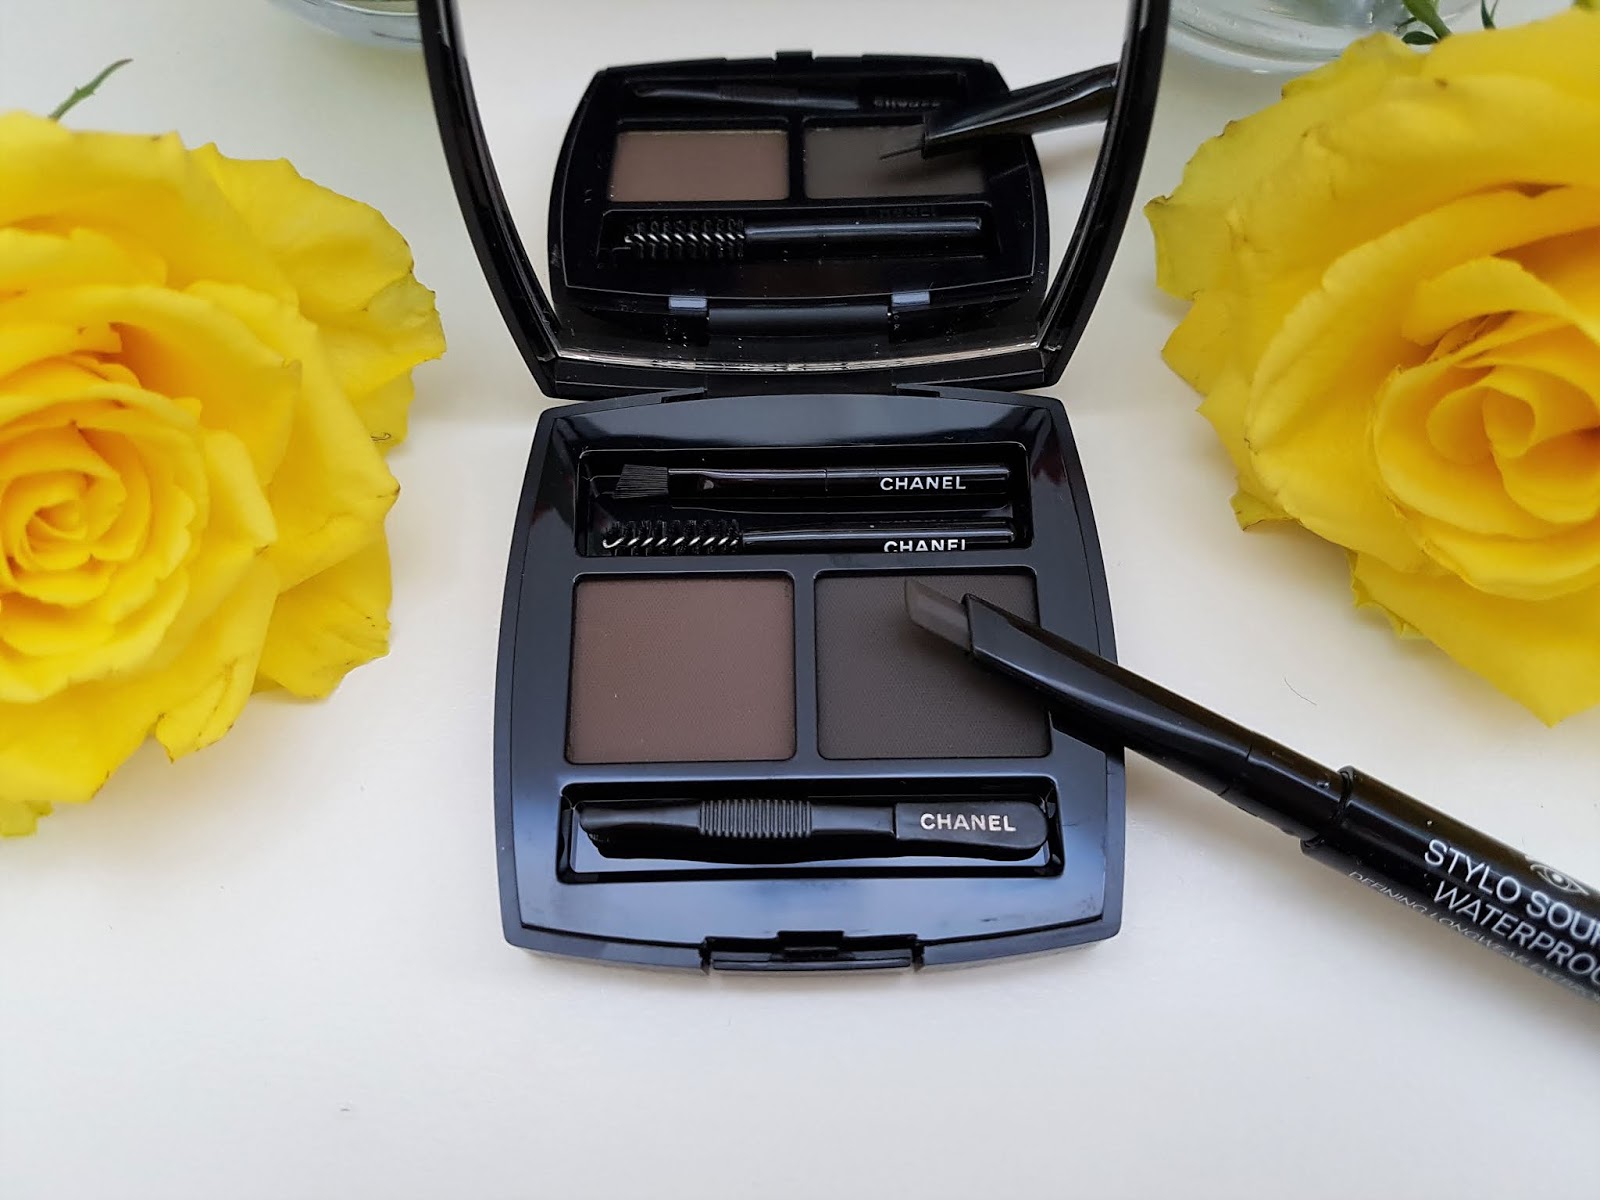 LA PALETTE SOURCILS duo Chanel Filling and Definition - Perfumes Club